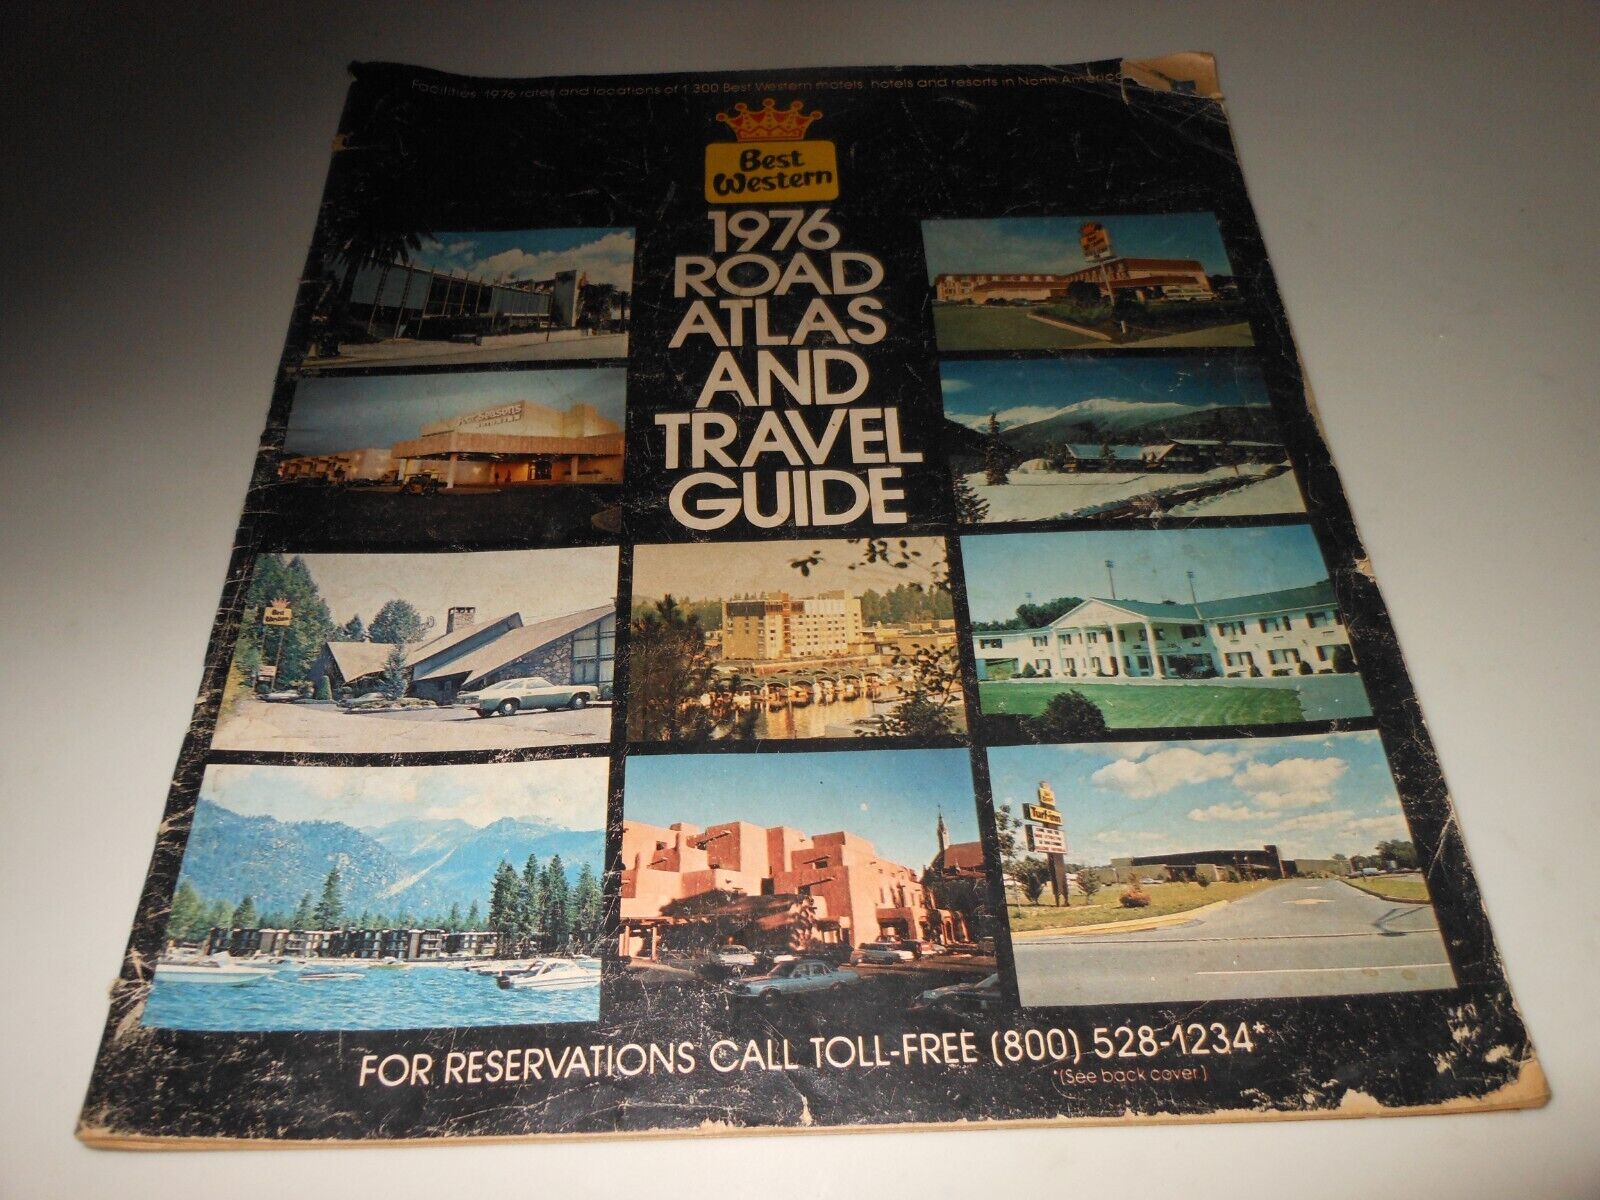 Best Western 1976 Road Atlas And Travel Guide